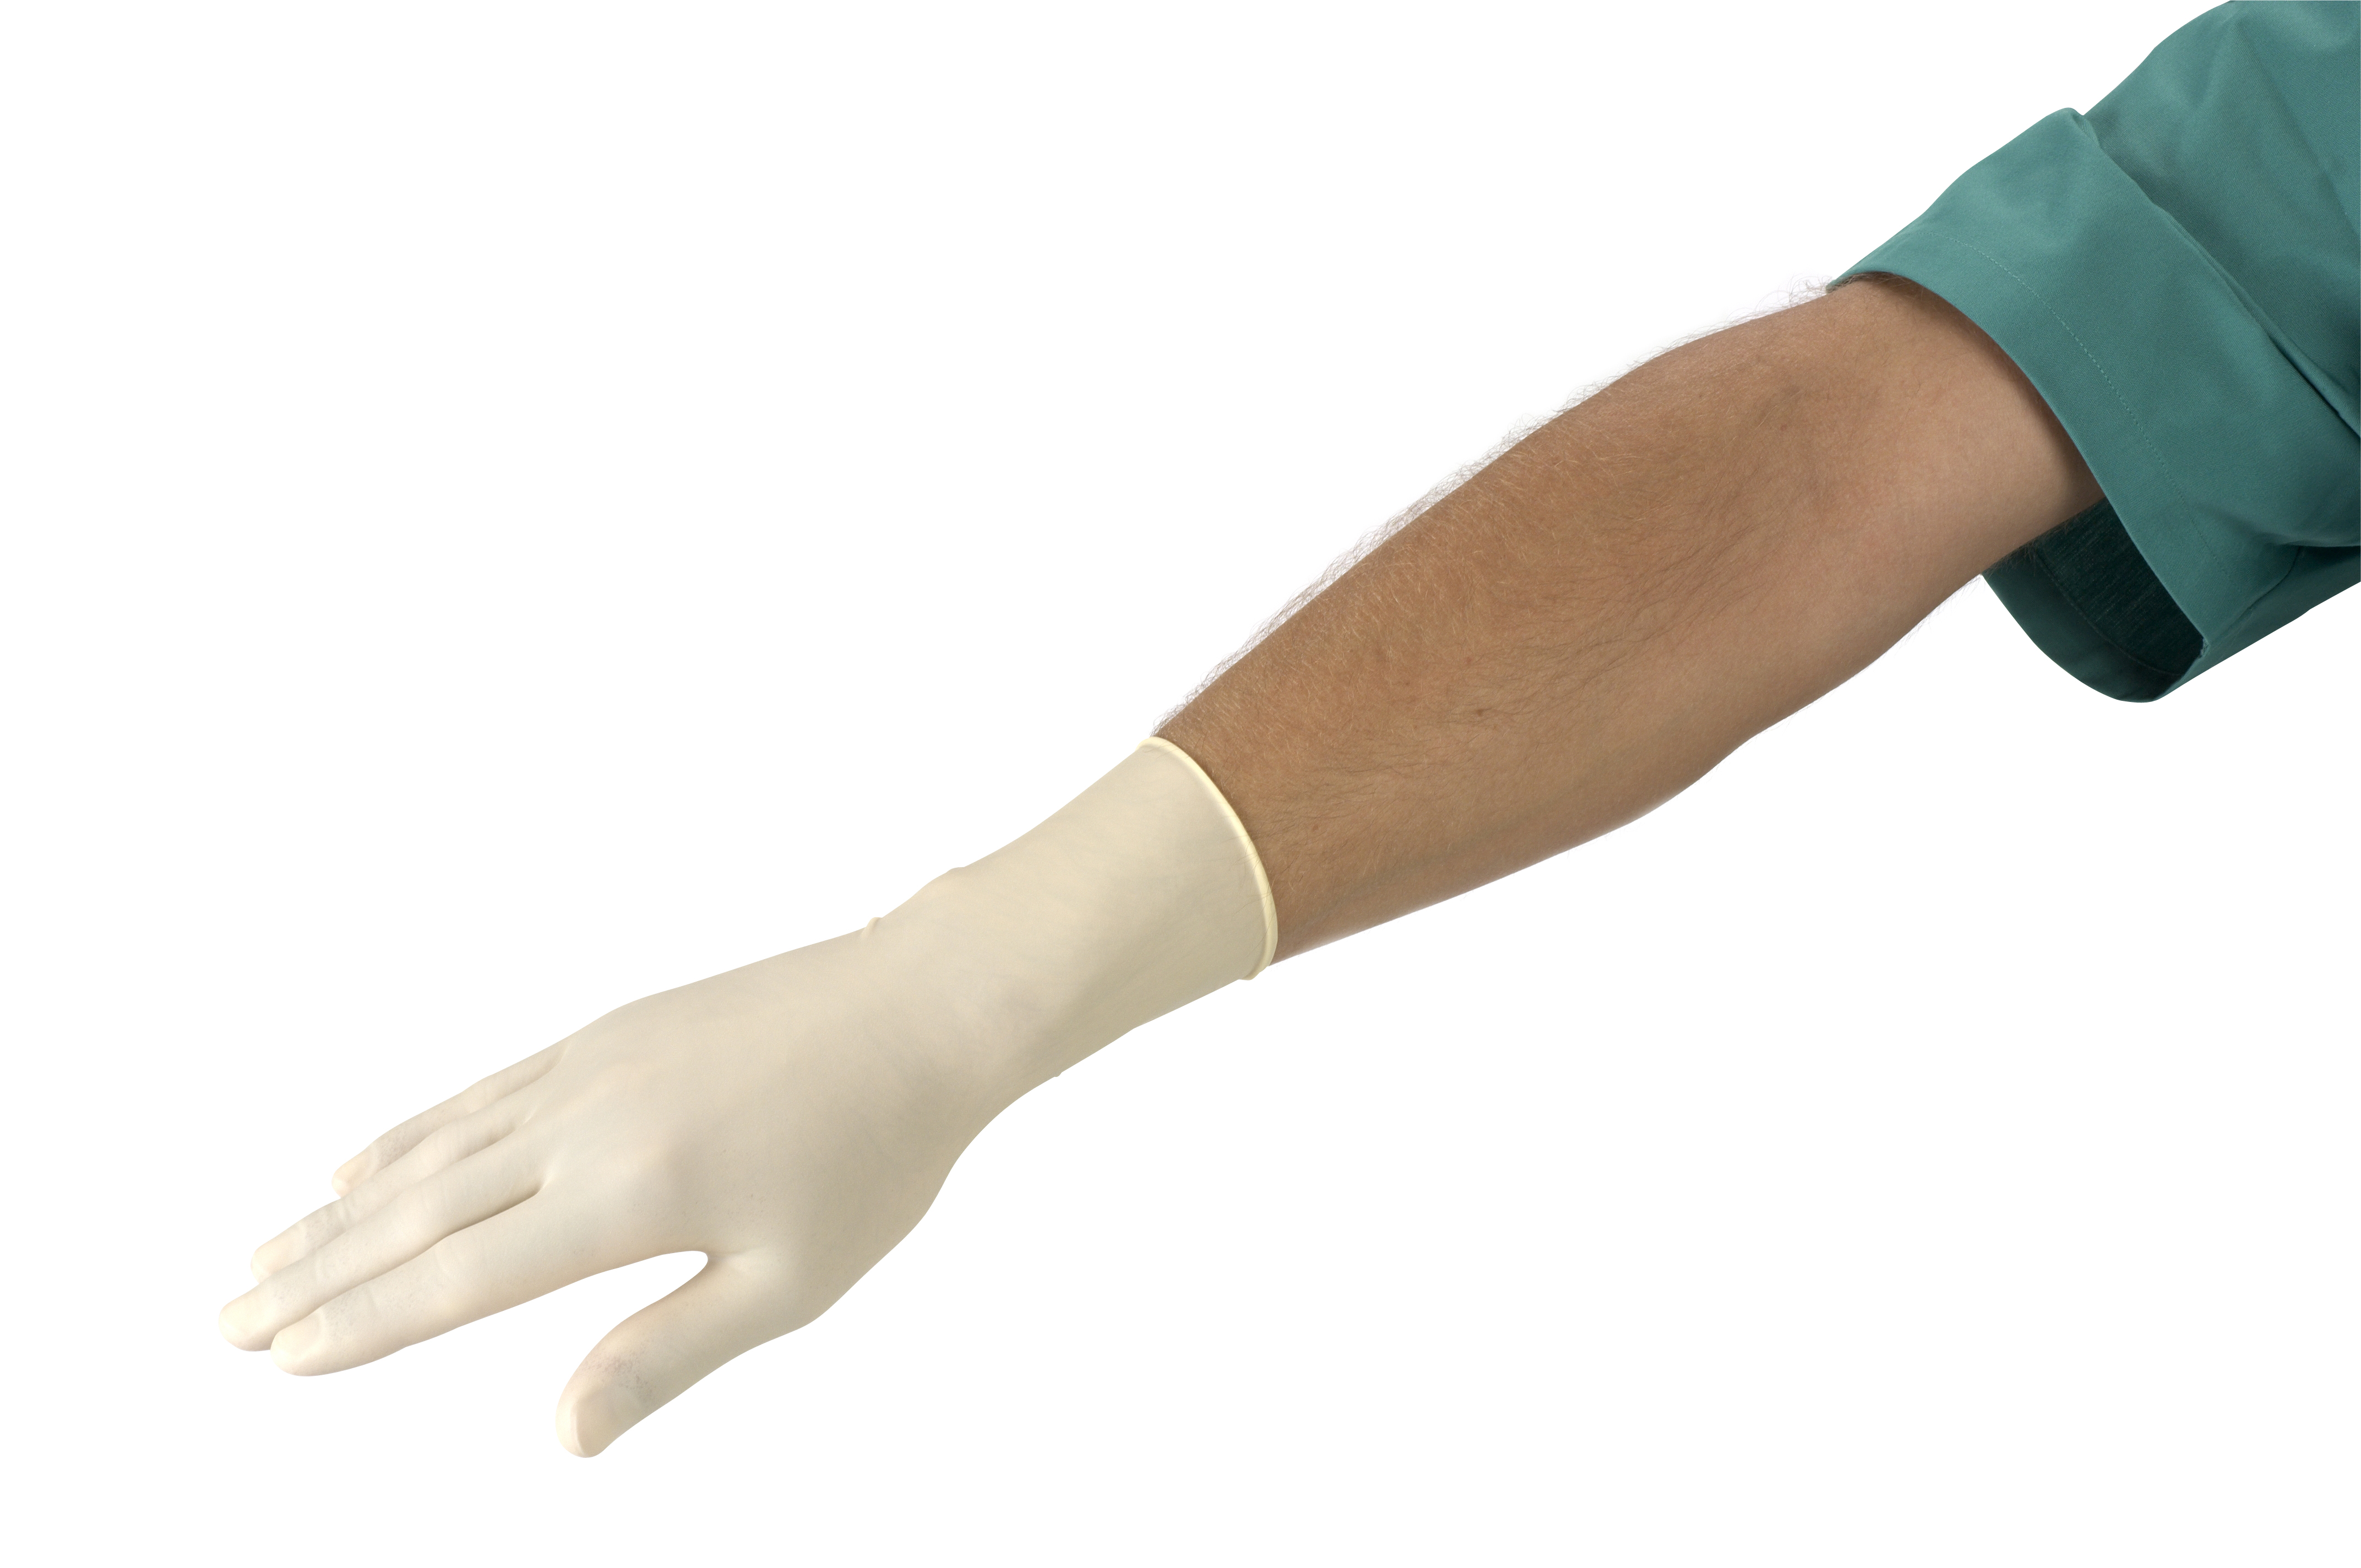 US -KRUTEX surgical gloves PF size 8.0, 50/pk